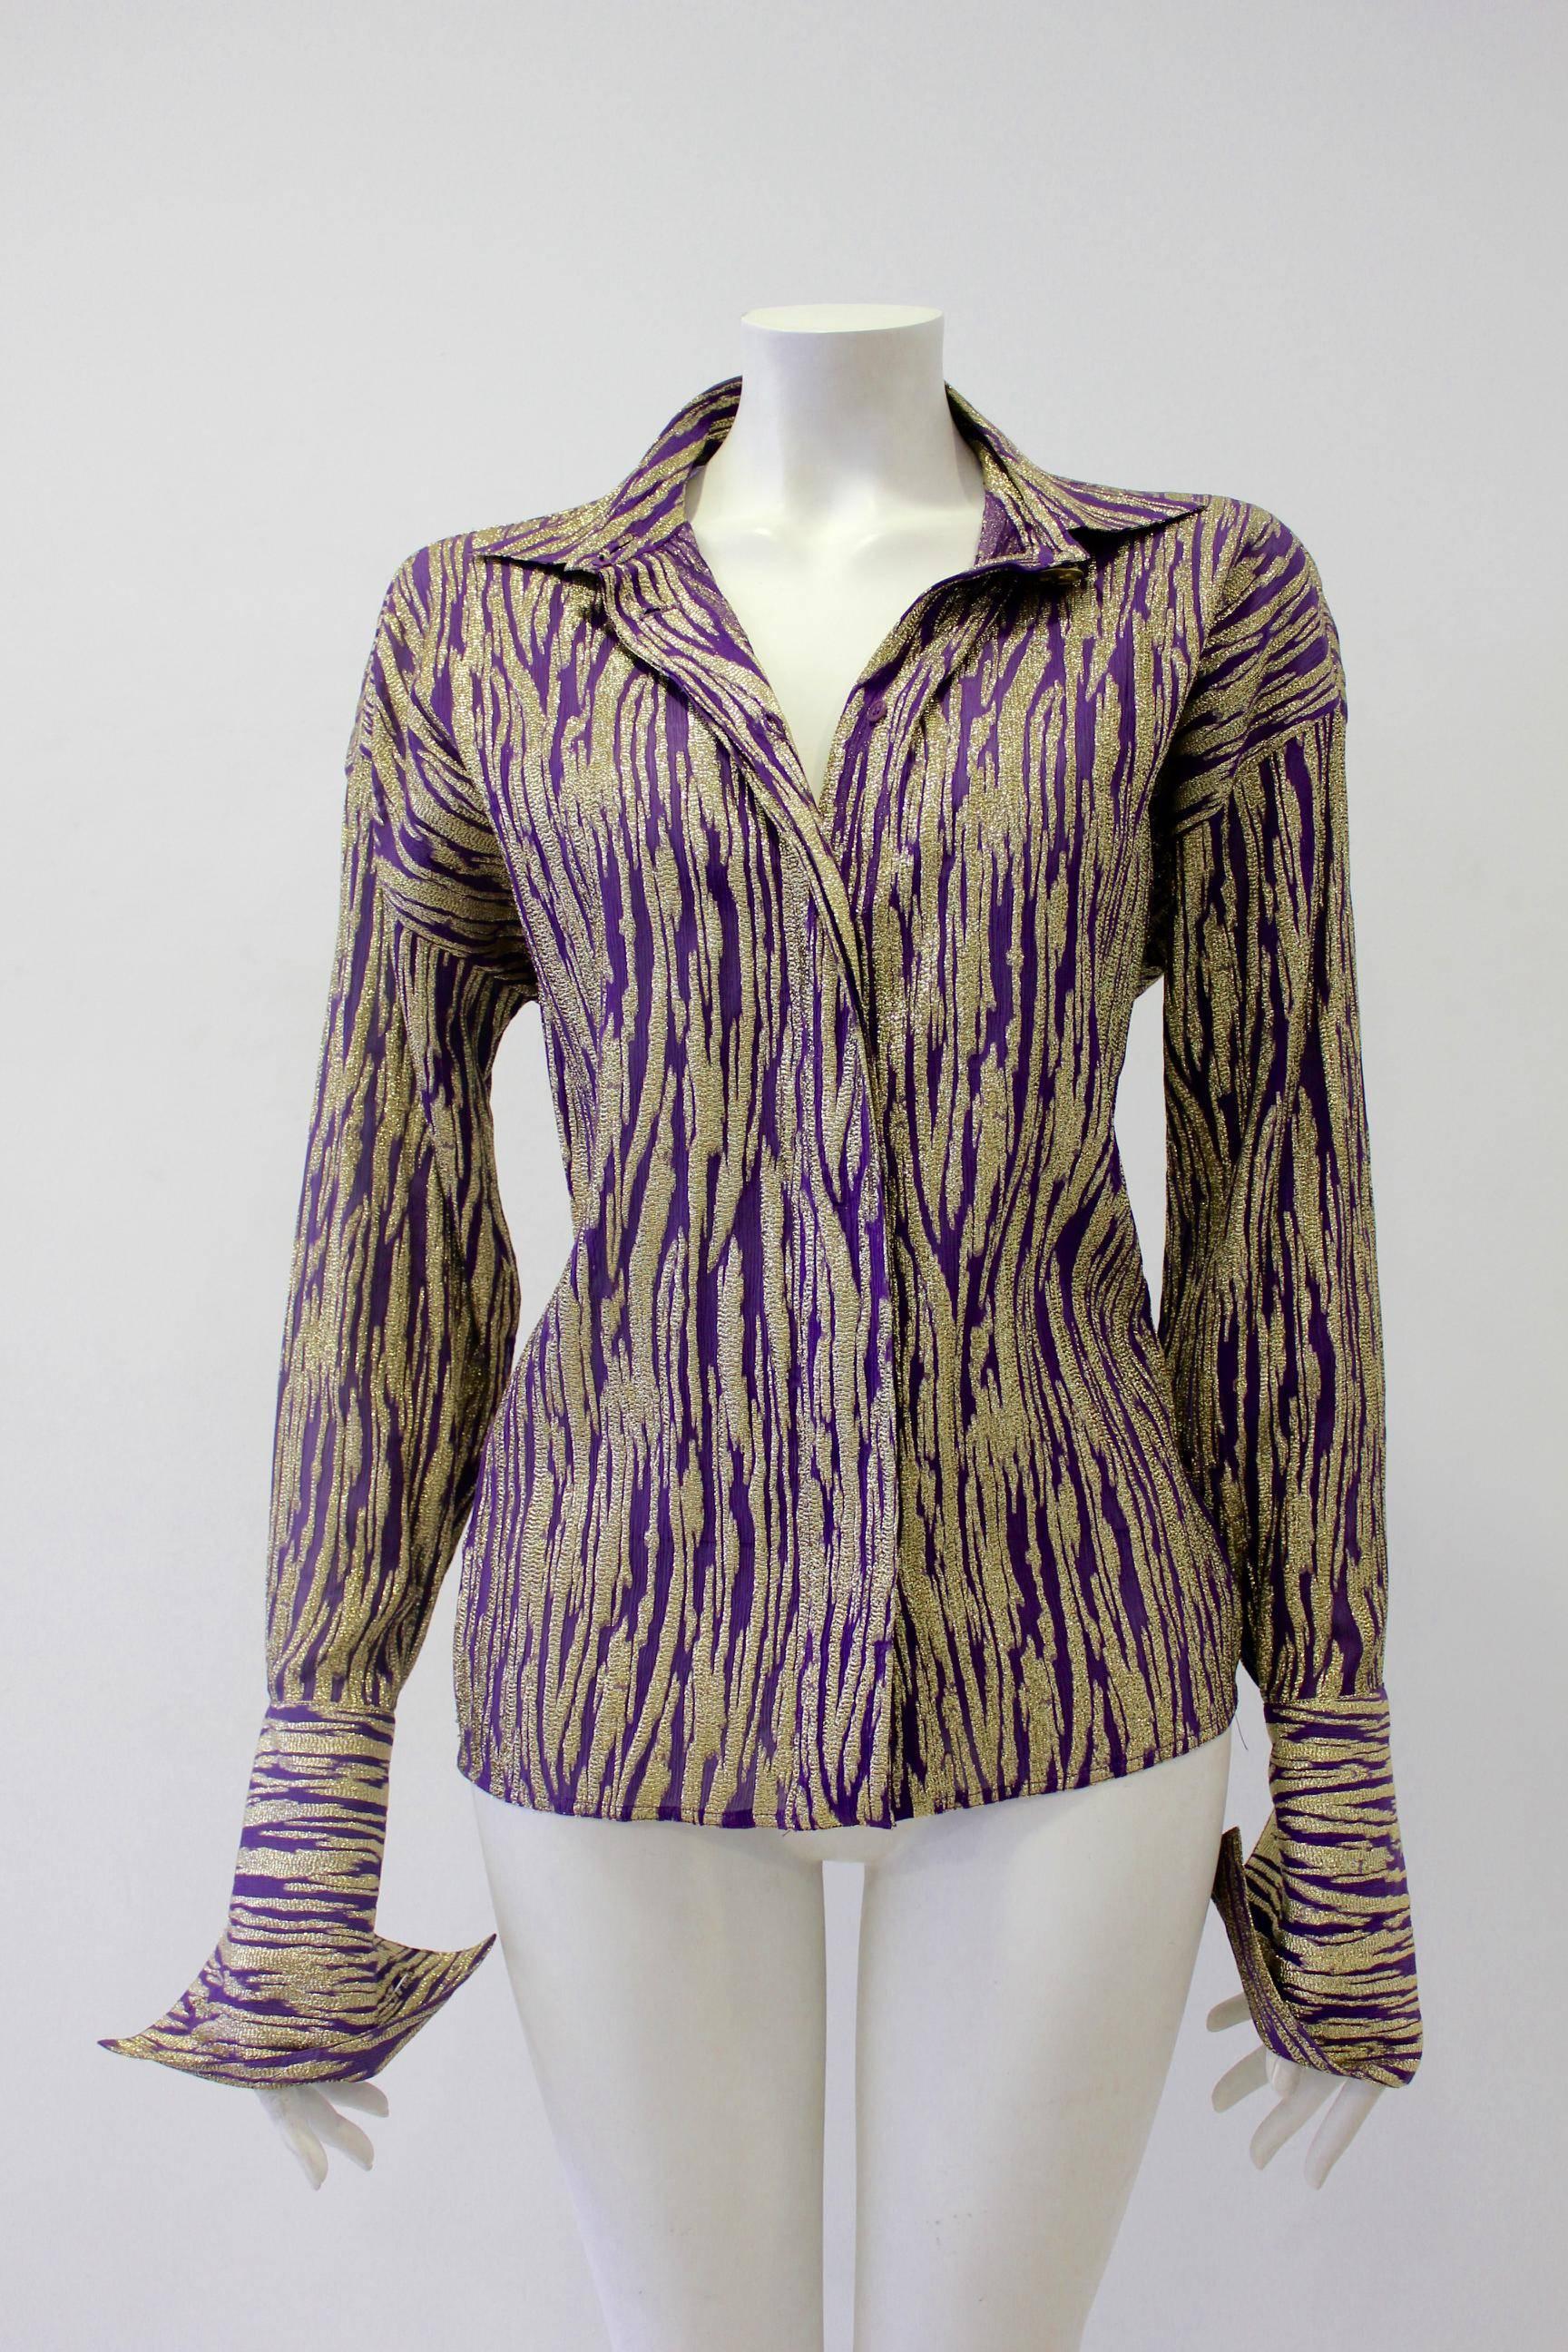 Very Particular Gold-Purple Lurex Gianni Versace Couture Shirt From Late 80's